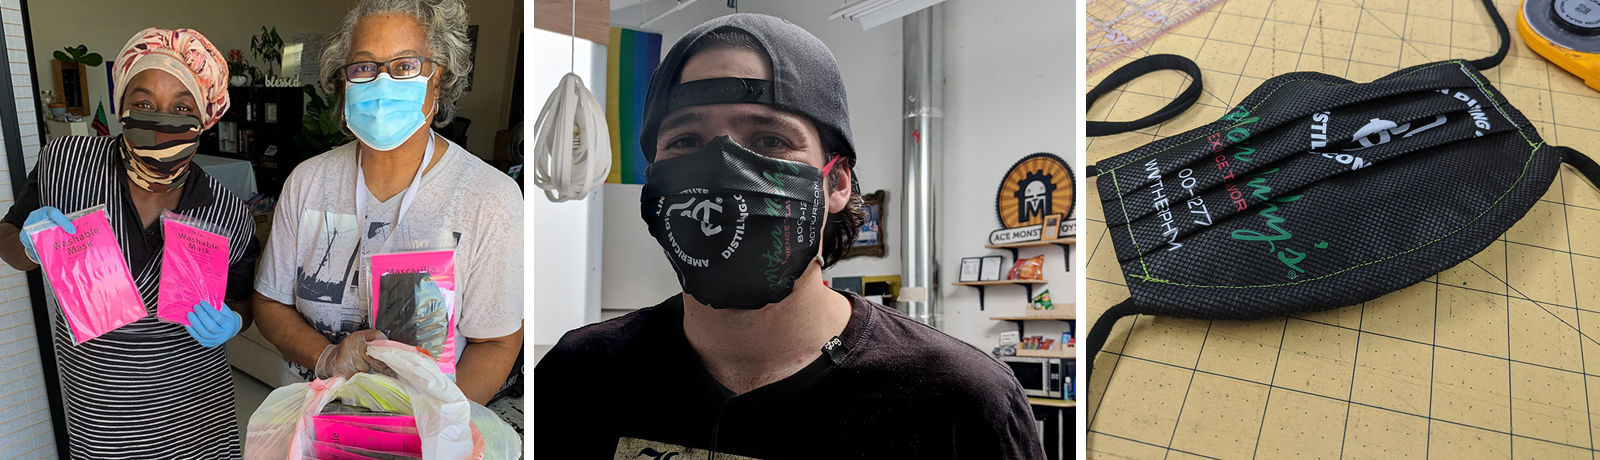 Photo Panel: (left) Two women with packaged masks; (middle) Person wearing a black "Distill My Heart" mask; (right) Black "Distill My Heart" spunbond nonwoven polypropylene mask on counter.